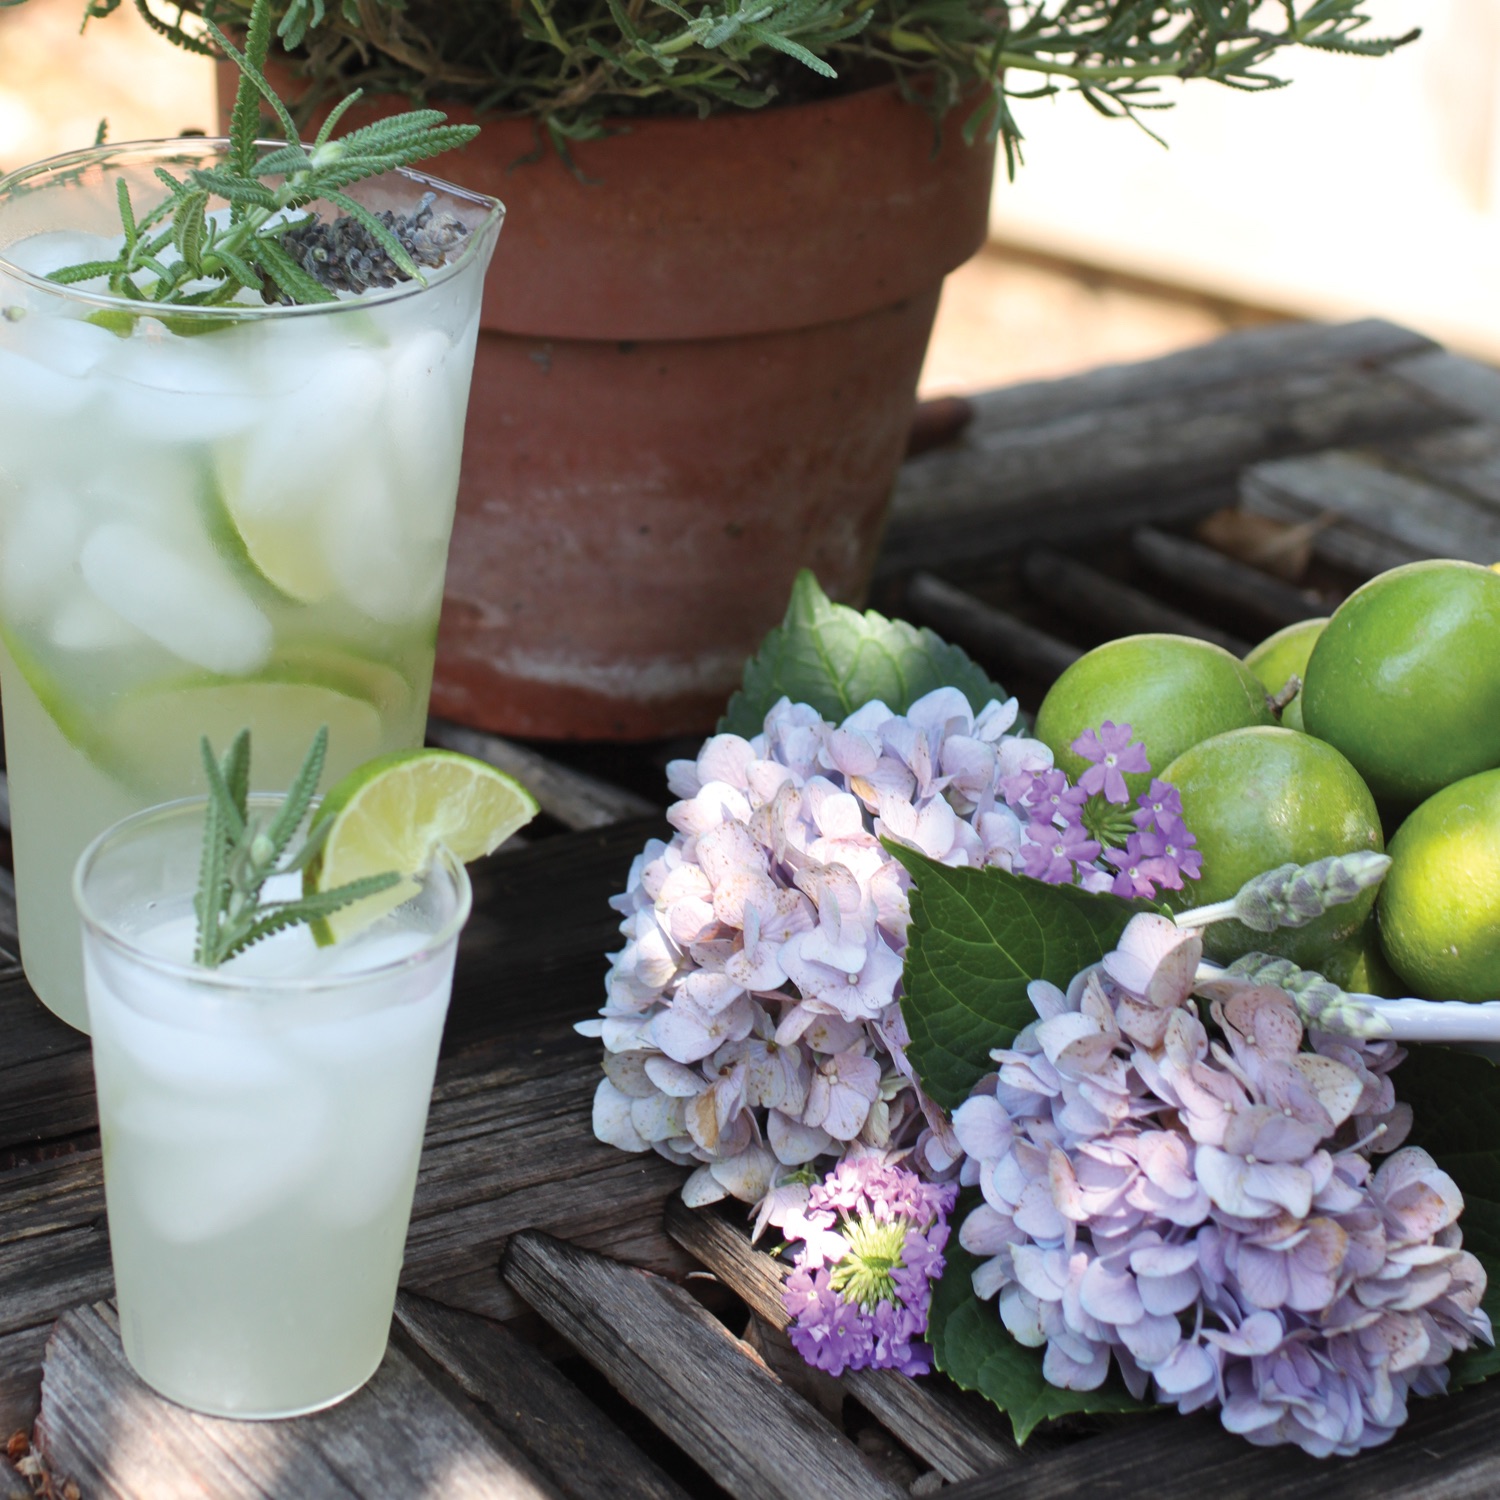 james farmer limeade with rosemary garnish, fresh-cut hydrangea and crepe myrtile blossoms, summer drinks